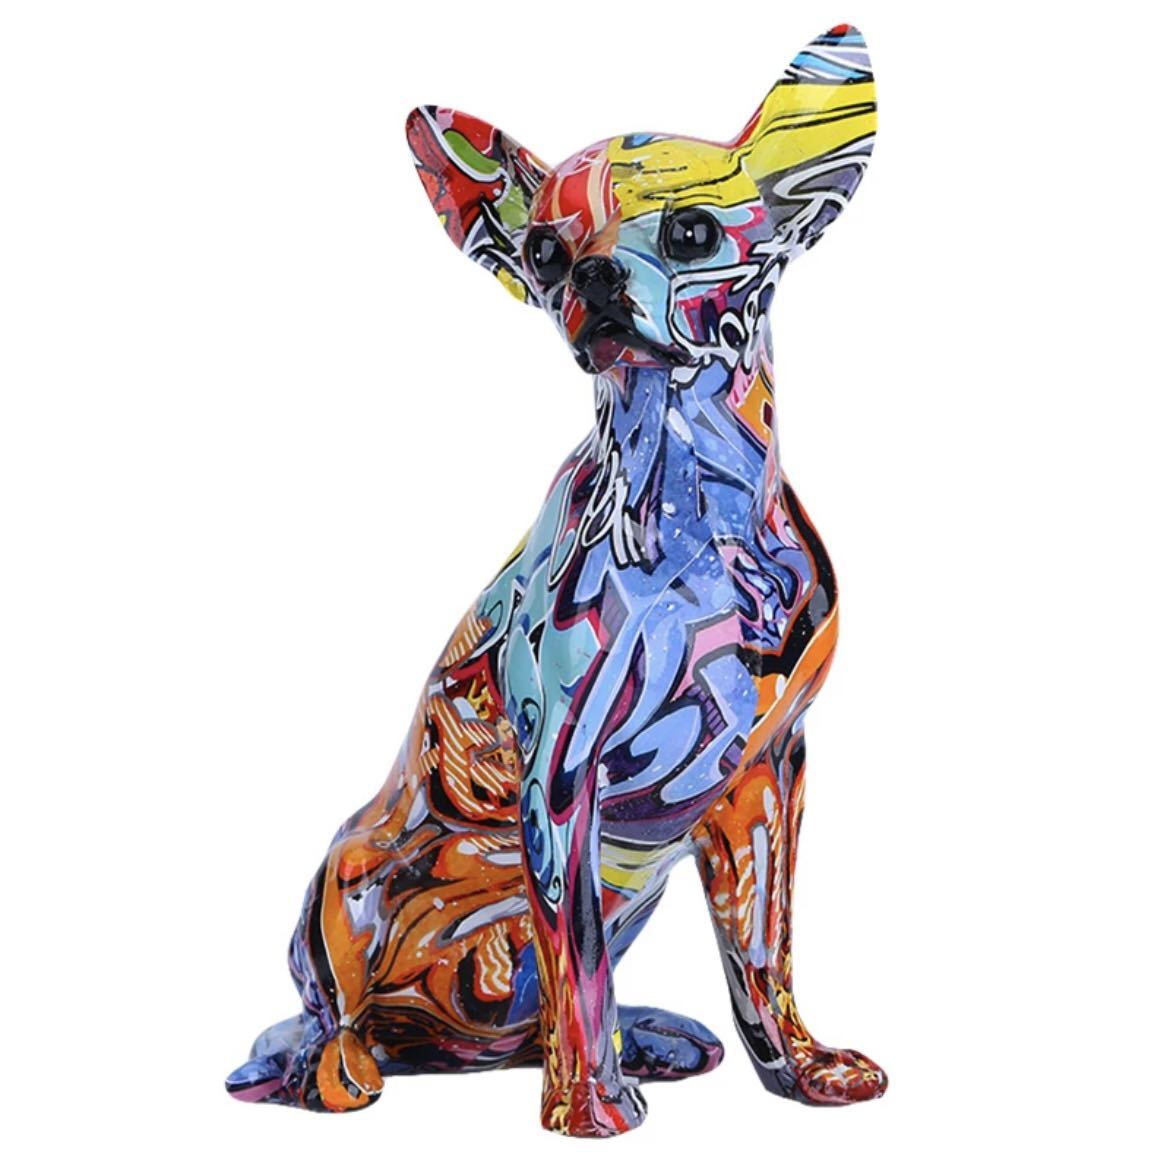 Painted Chihuahua Graffiti Figurine Colorful Chihuahua Paint Dog Resin Interior Object Small Item Modern Art Artistic Abstract 552, Handmade items, interior, miscellaneous goods, ornament, object